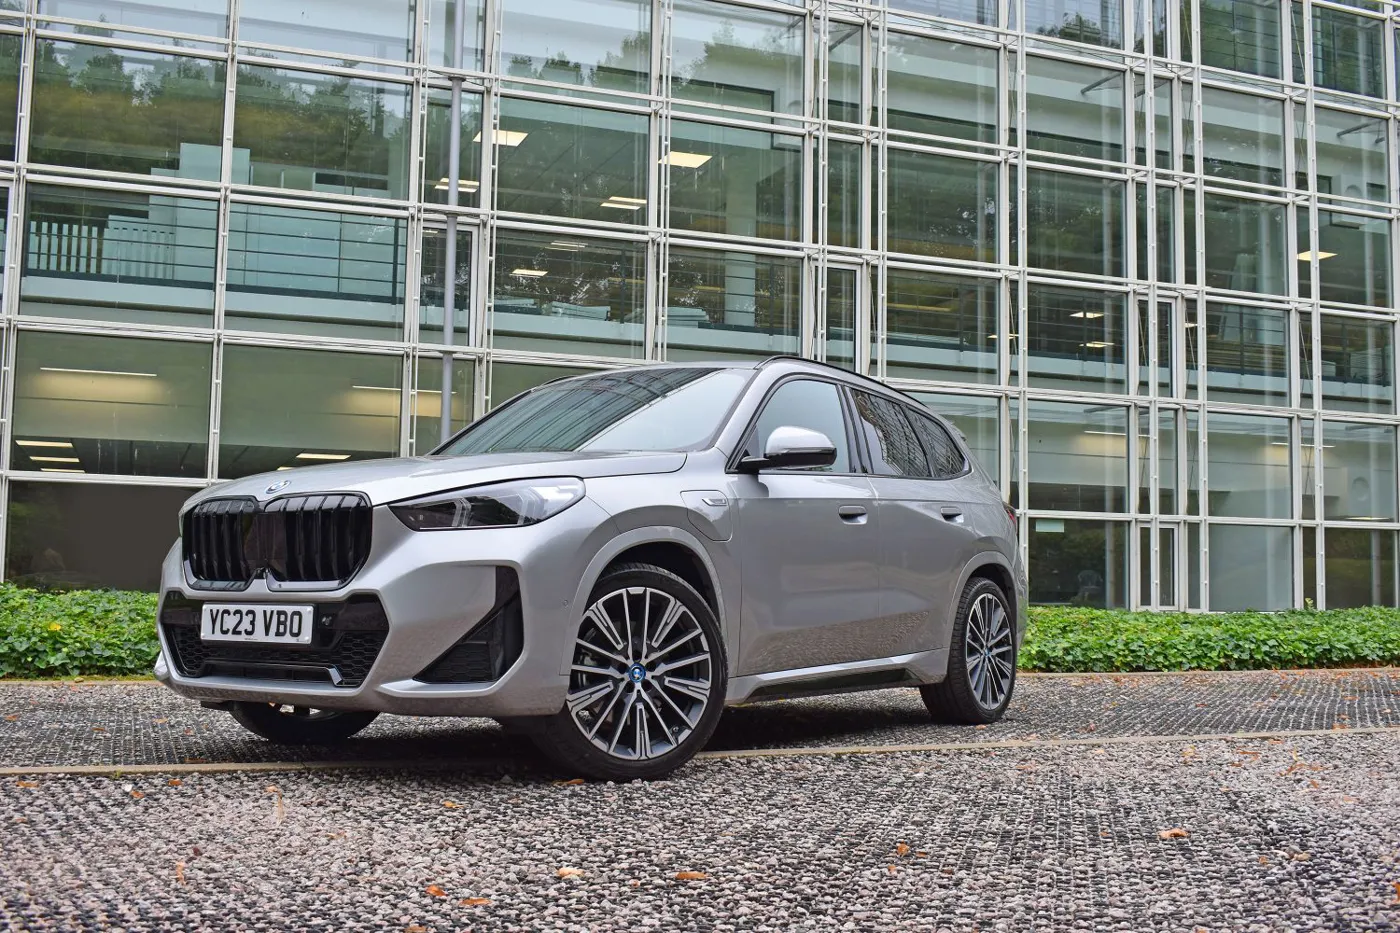 BMW X1 xDrive30e long-term test, mpg and range tested